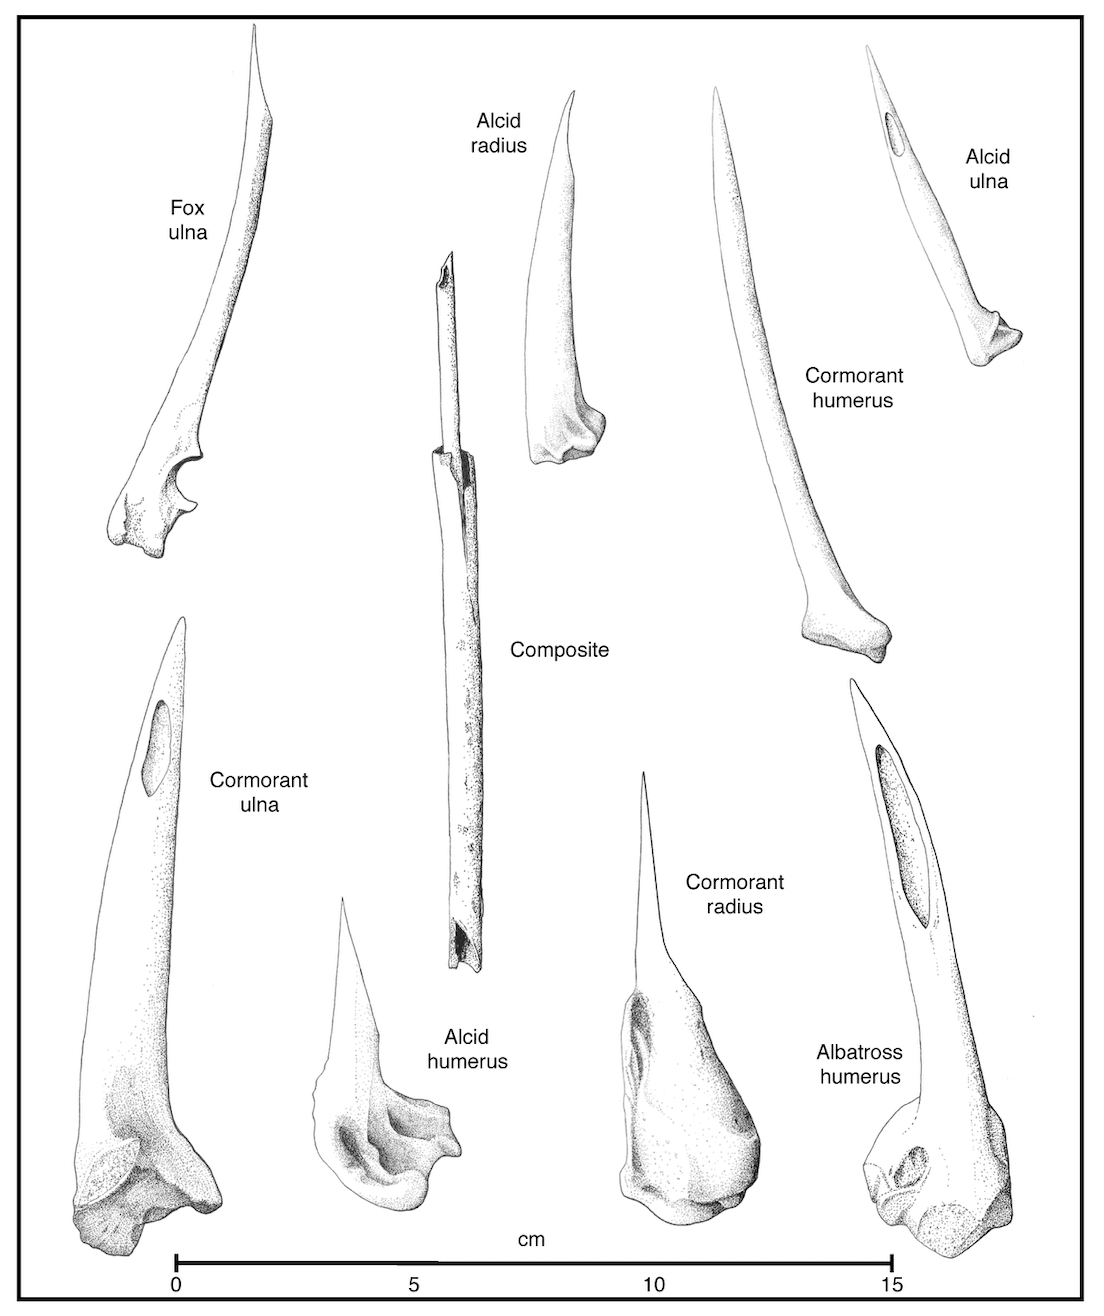 This drawing or image or illustration or depiction of the types of awlsmade from bird bones likelcids, cormorants, albatross and fox ulnasand radii